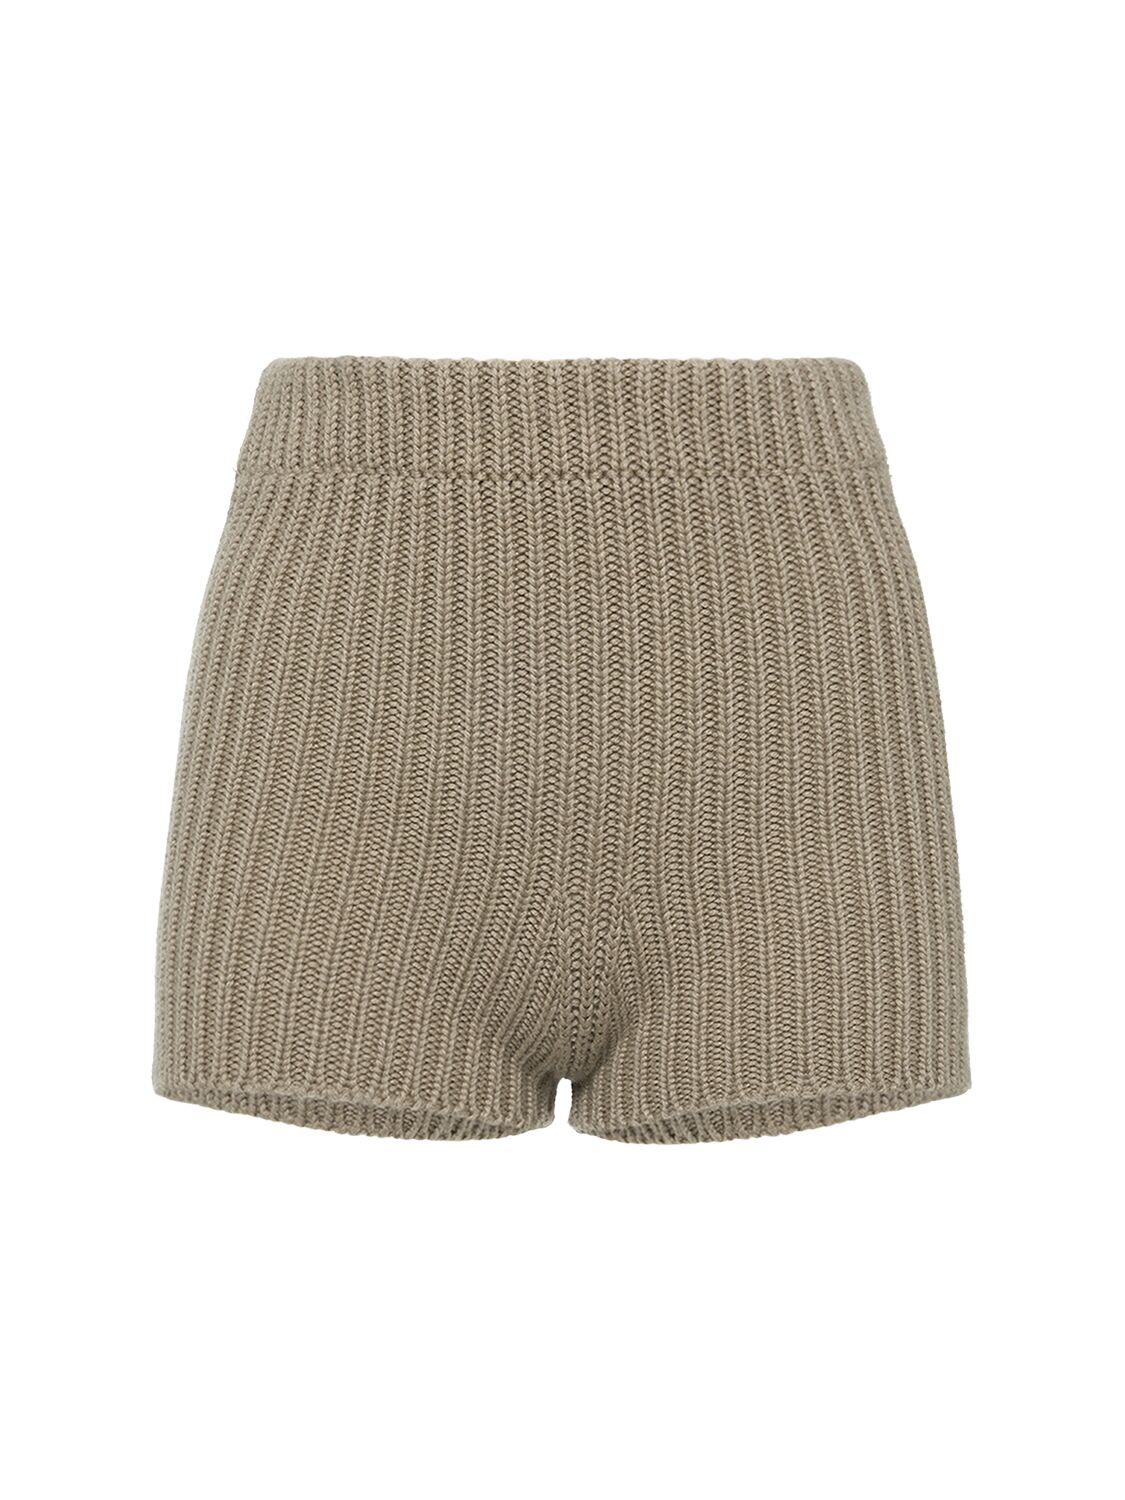 Image of Acceso1234 Cotton Rib Knit Shorts